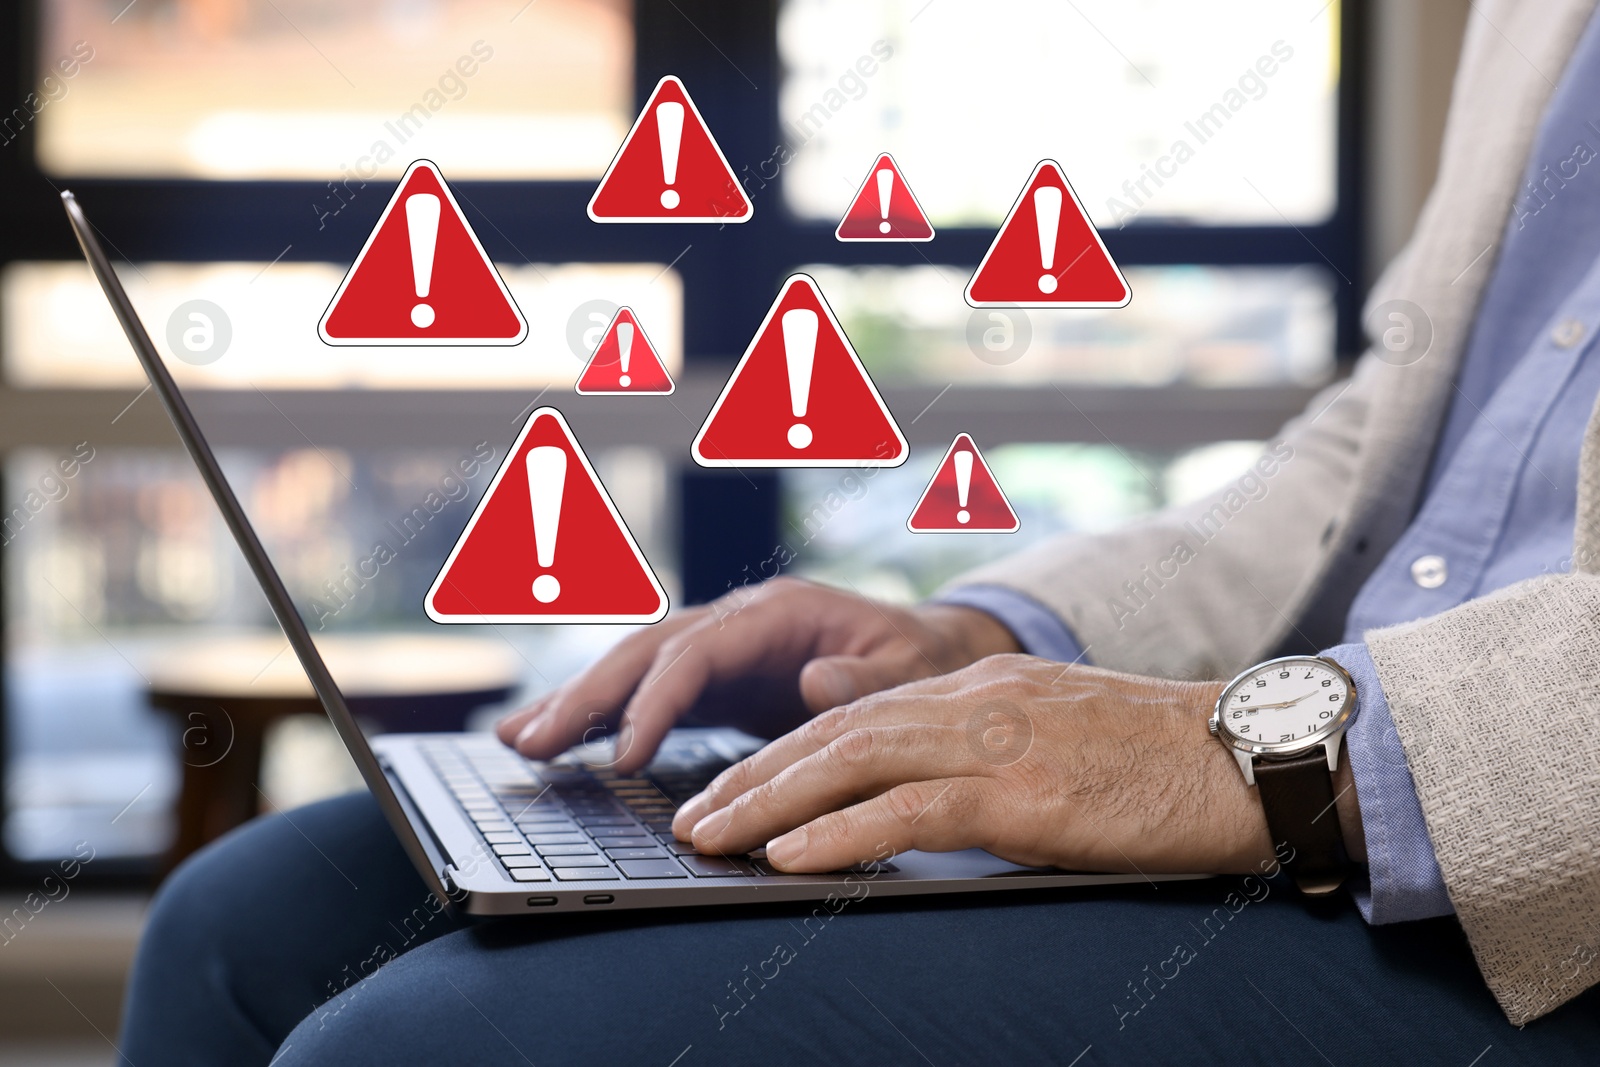 Image of Man using laptop at table, closeup. Warning signs for spam messages above device